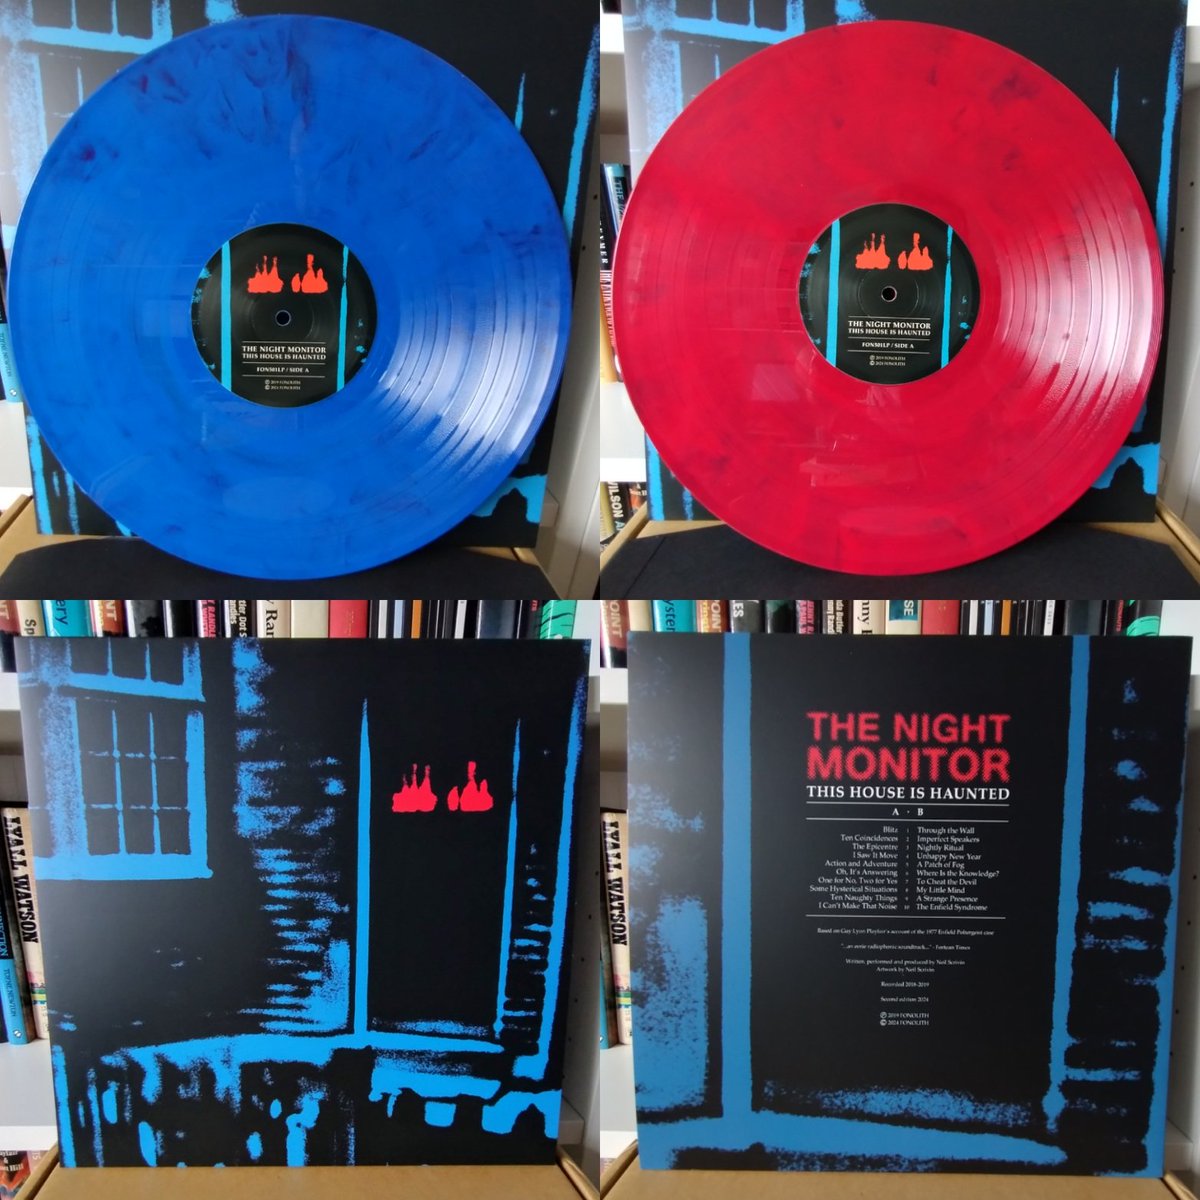 My 2019 debut album 'This House Is Haunted' - inspired by the Enfield Poltergeist case - is back on vinyl. 200 copies on two colour variants - marble blue + ultra limited marble red (30 copies exclusively on Bandcamp). Pre-order now. Releases 5th July. thenightmonitor.bandcamp.com/album/this-hou…